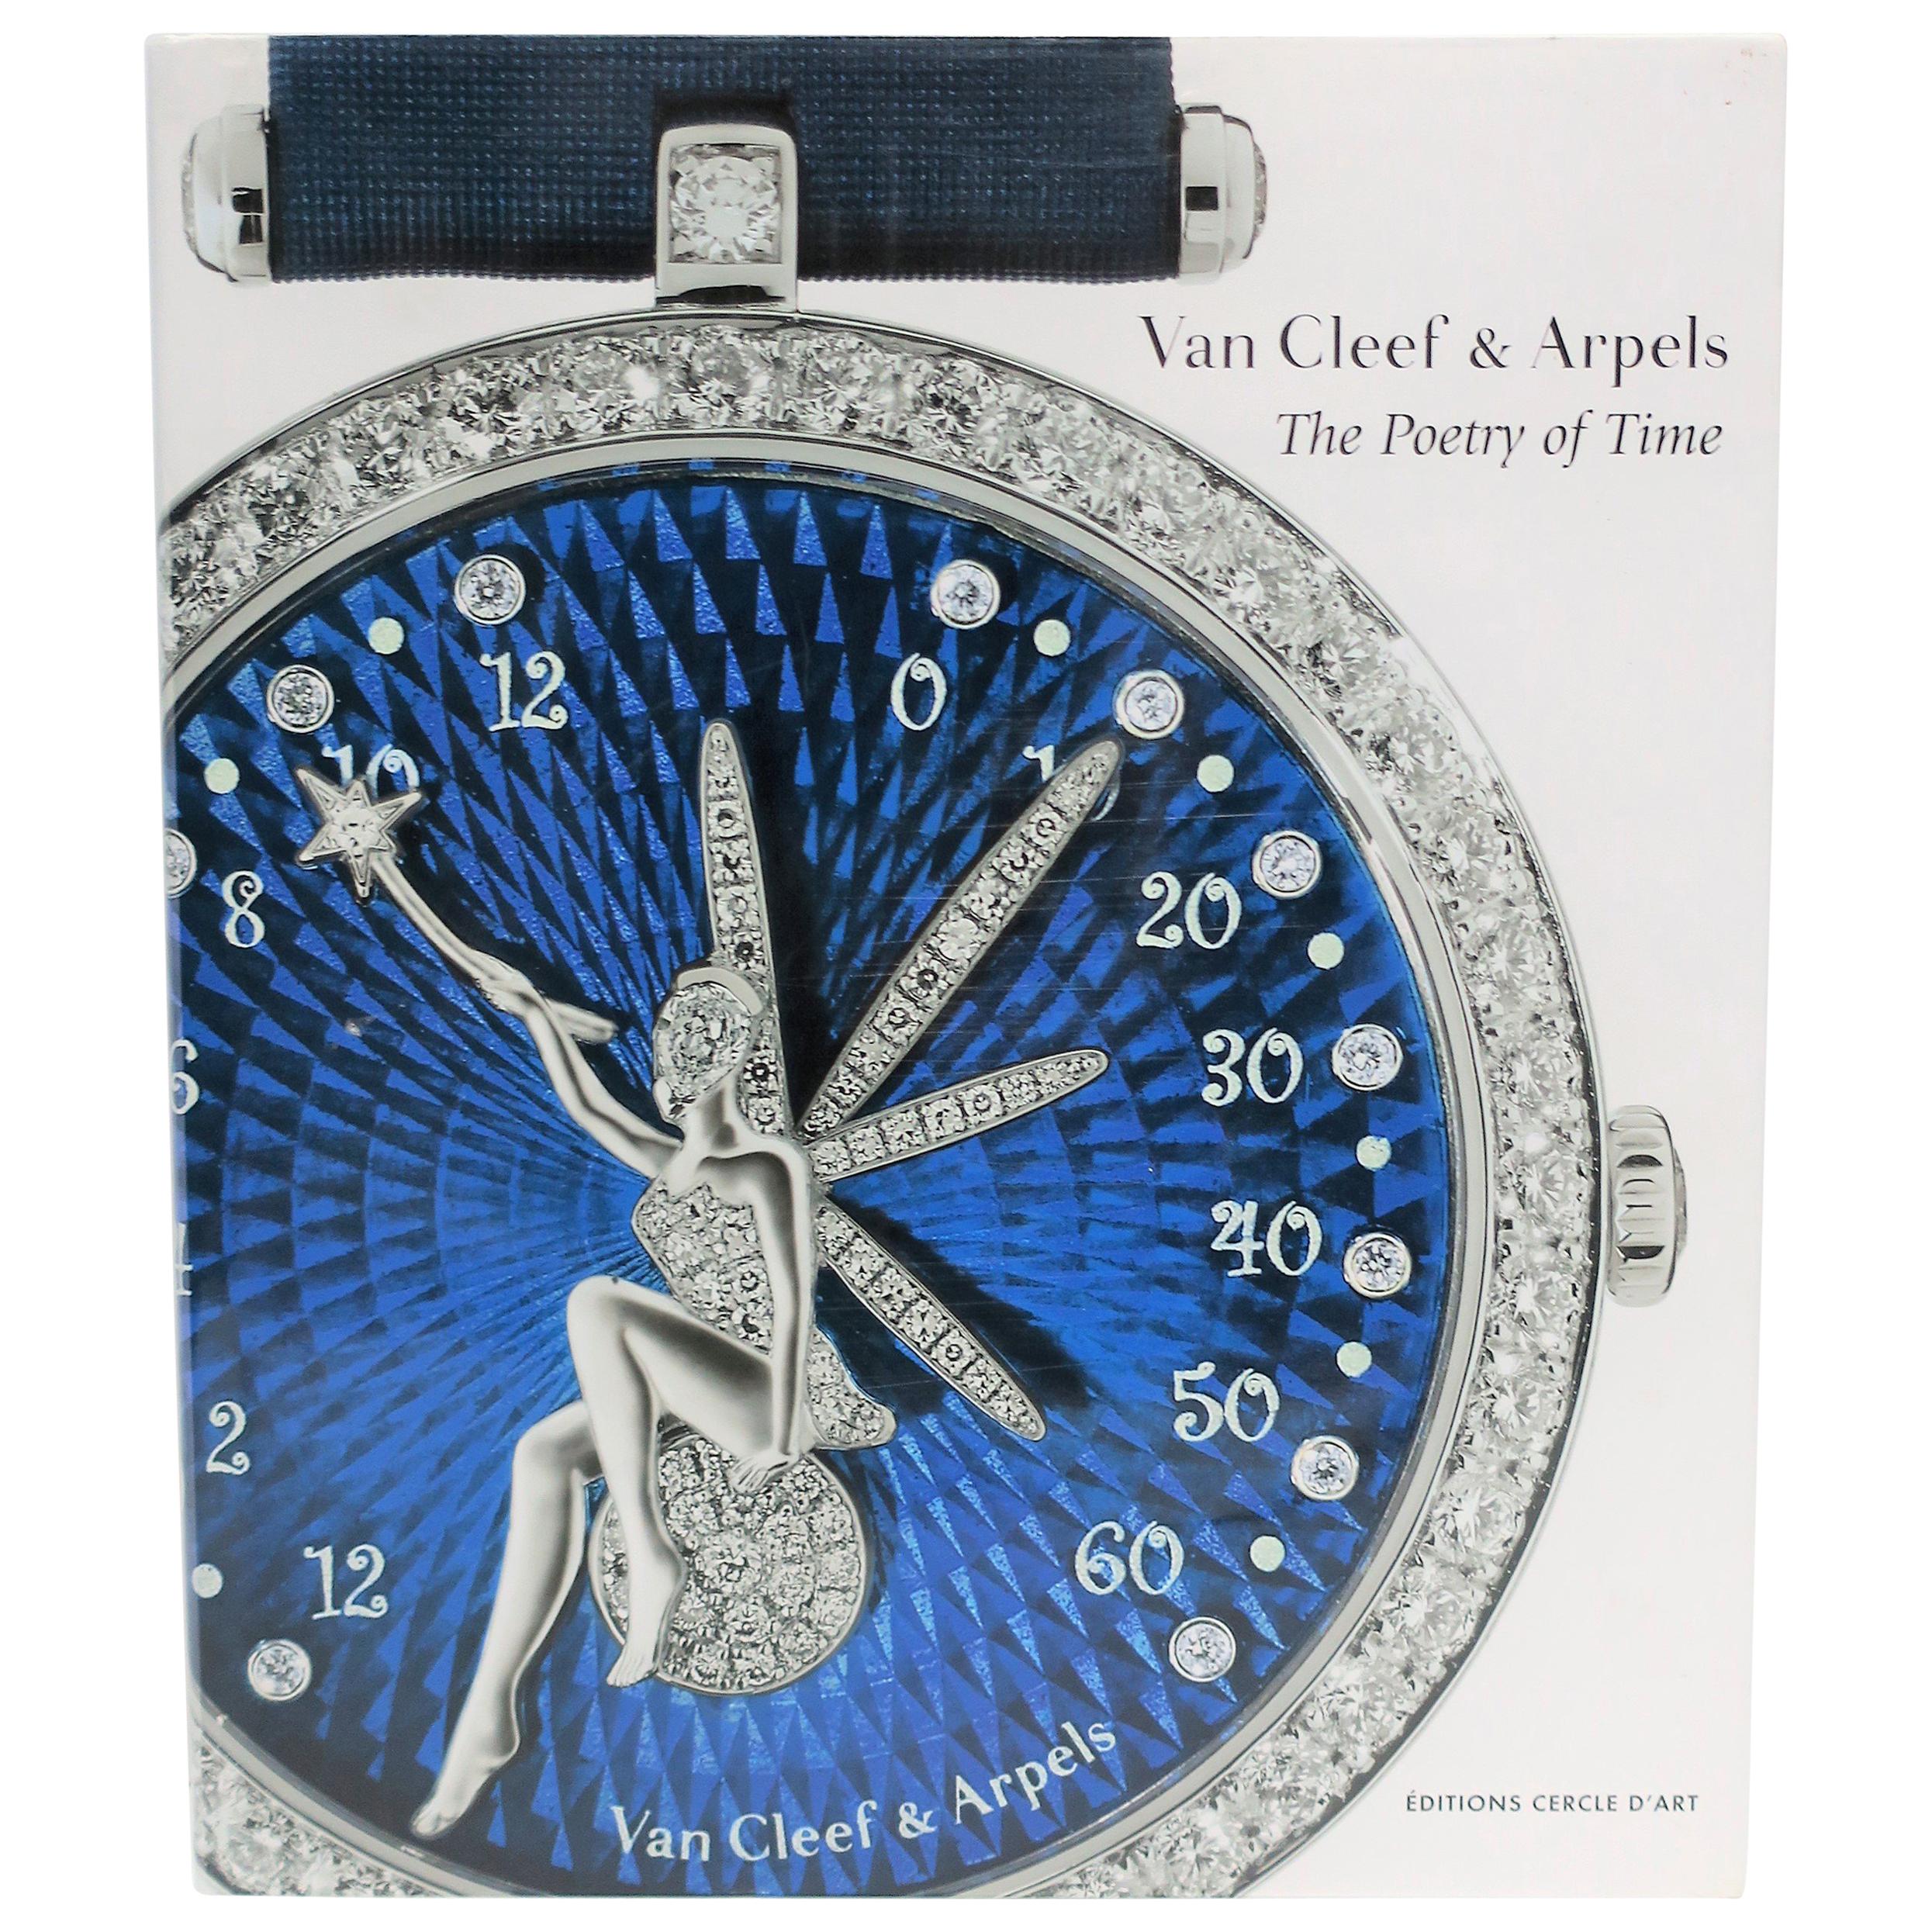 Van Cleef & Arpels, The Poetry of Time, Coffee Table or Library Book